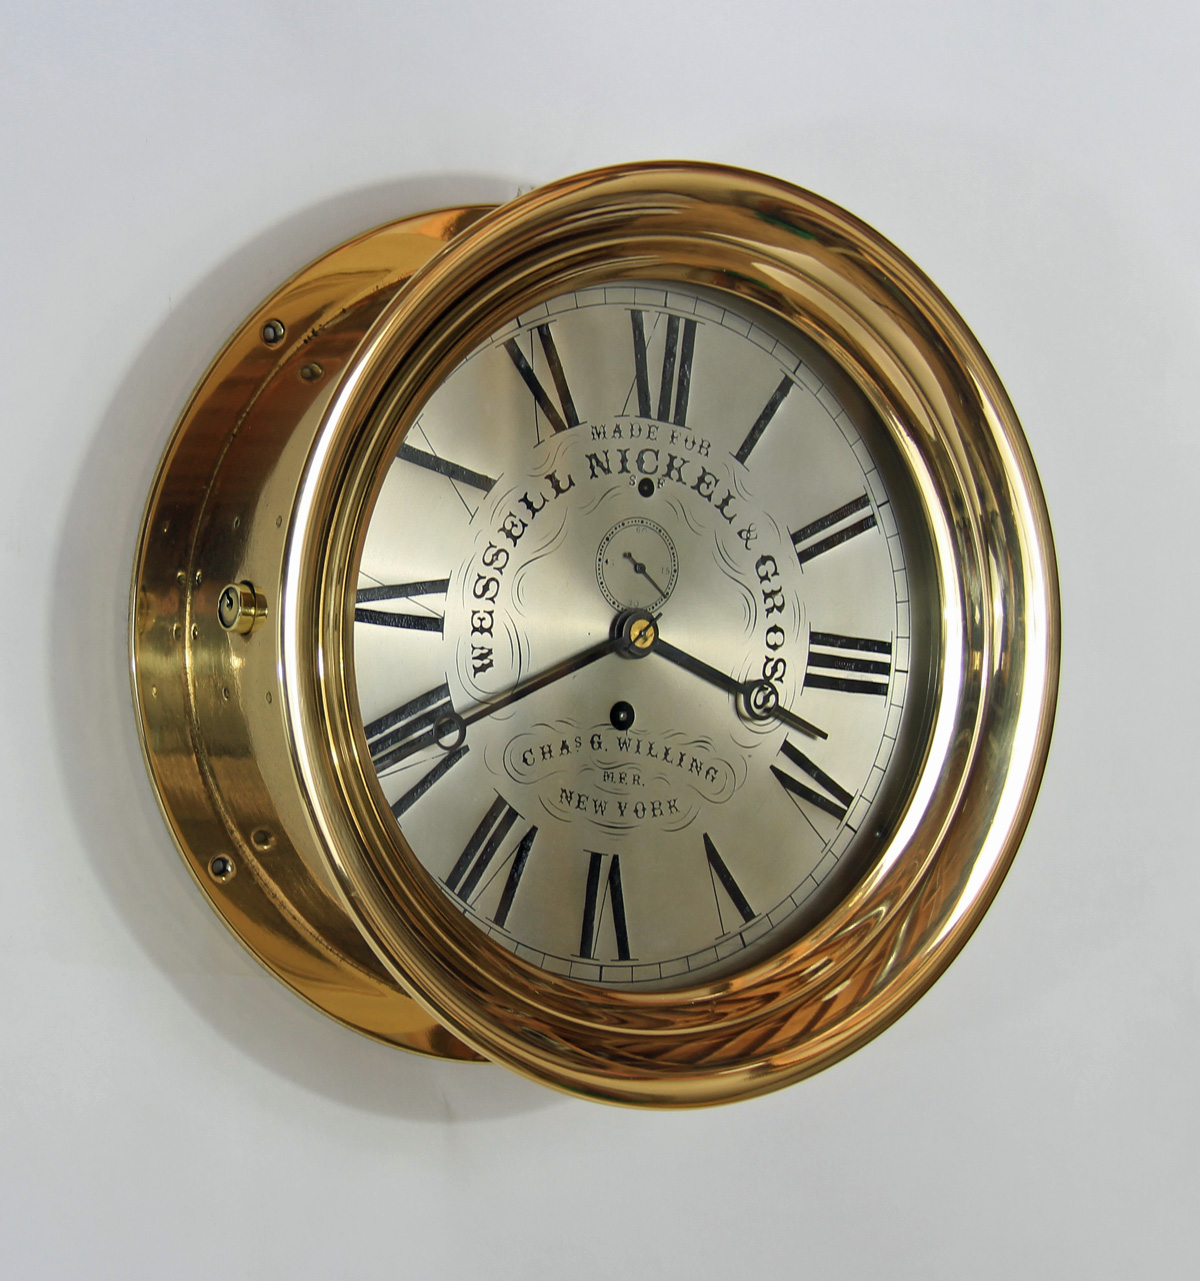 E. Howard 10 inch Marine Clock for Wessell Nickels & Gross